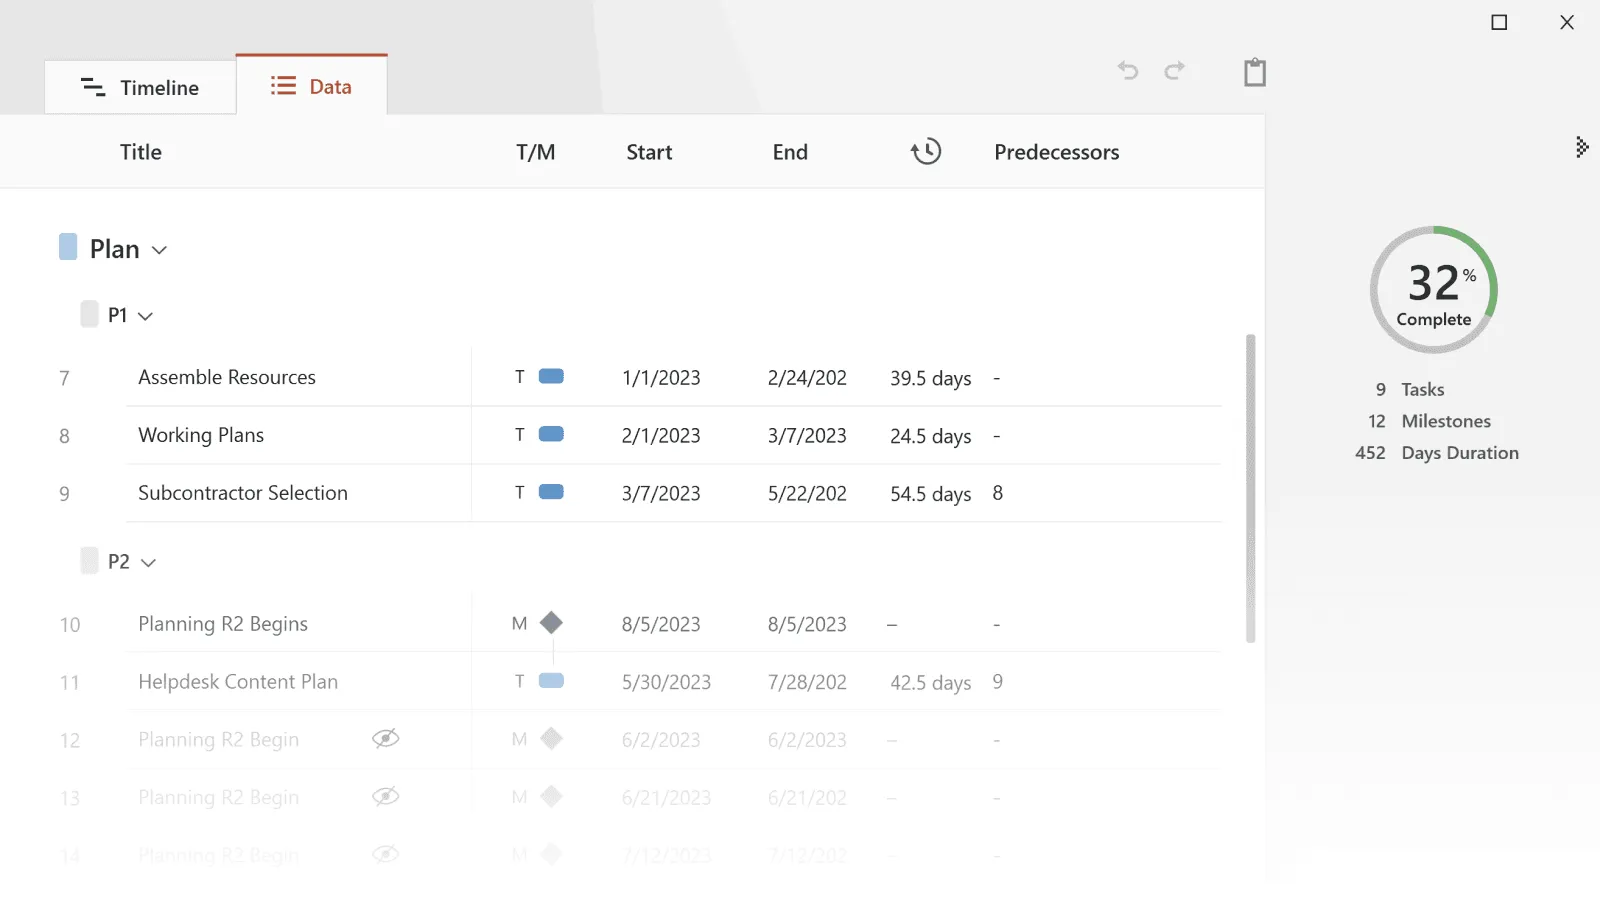 Build and update project timelines in PowerPoint